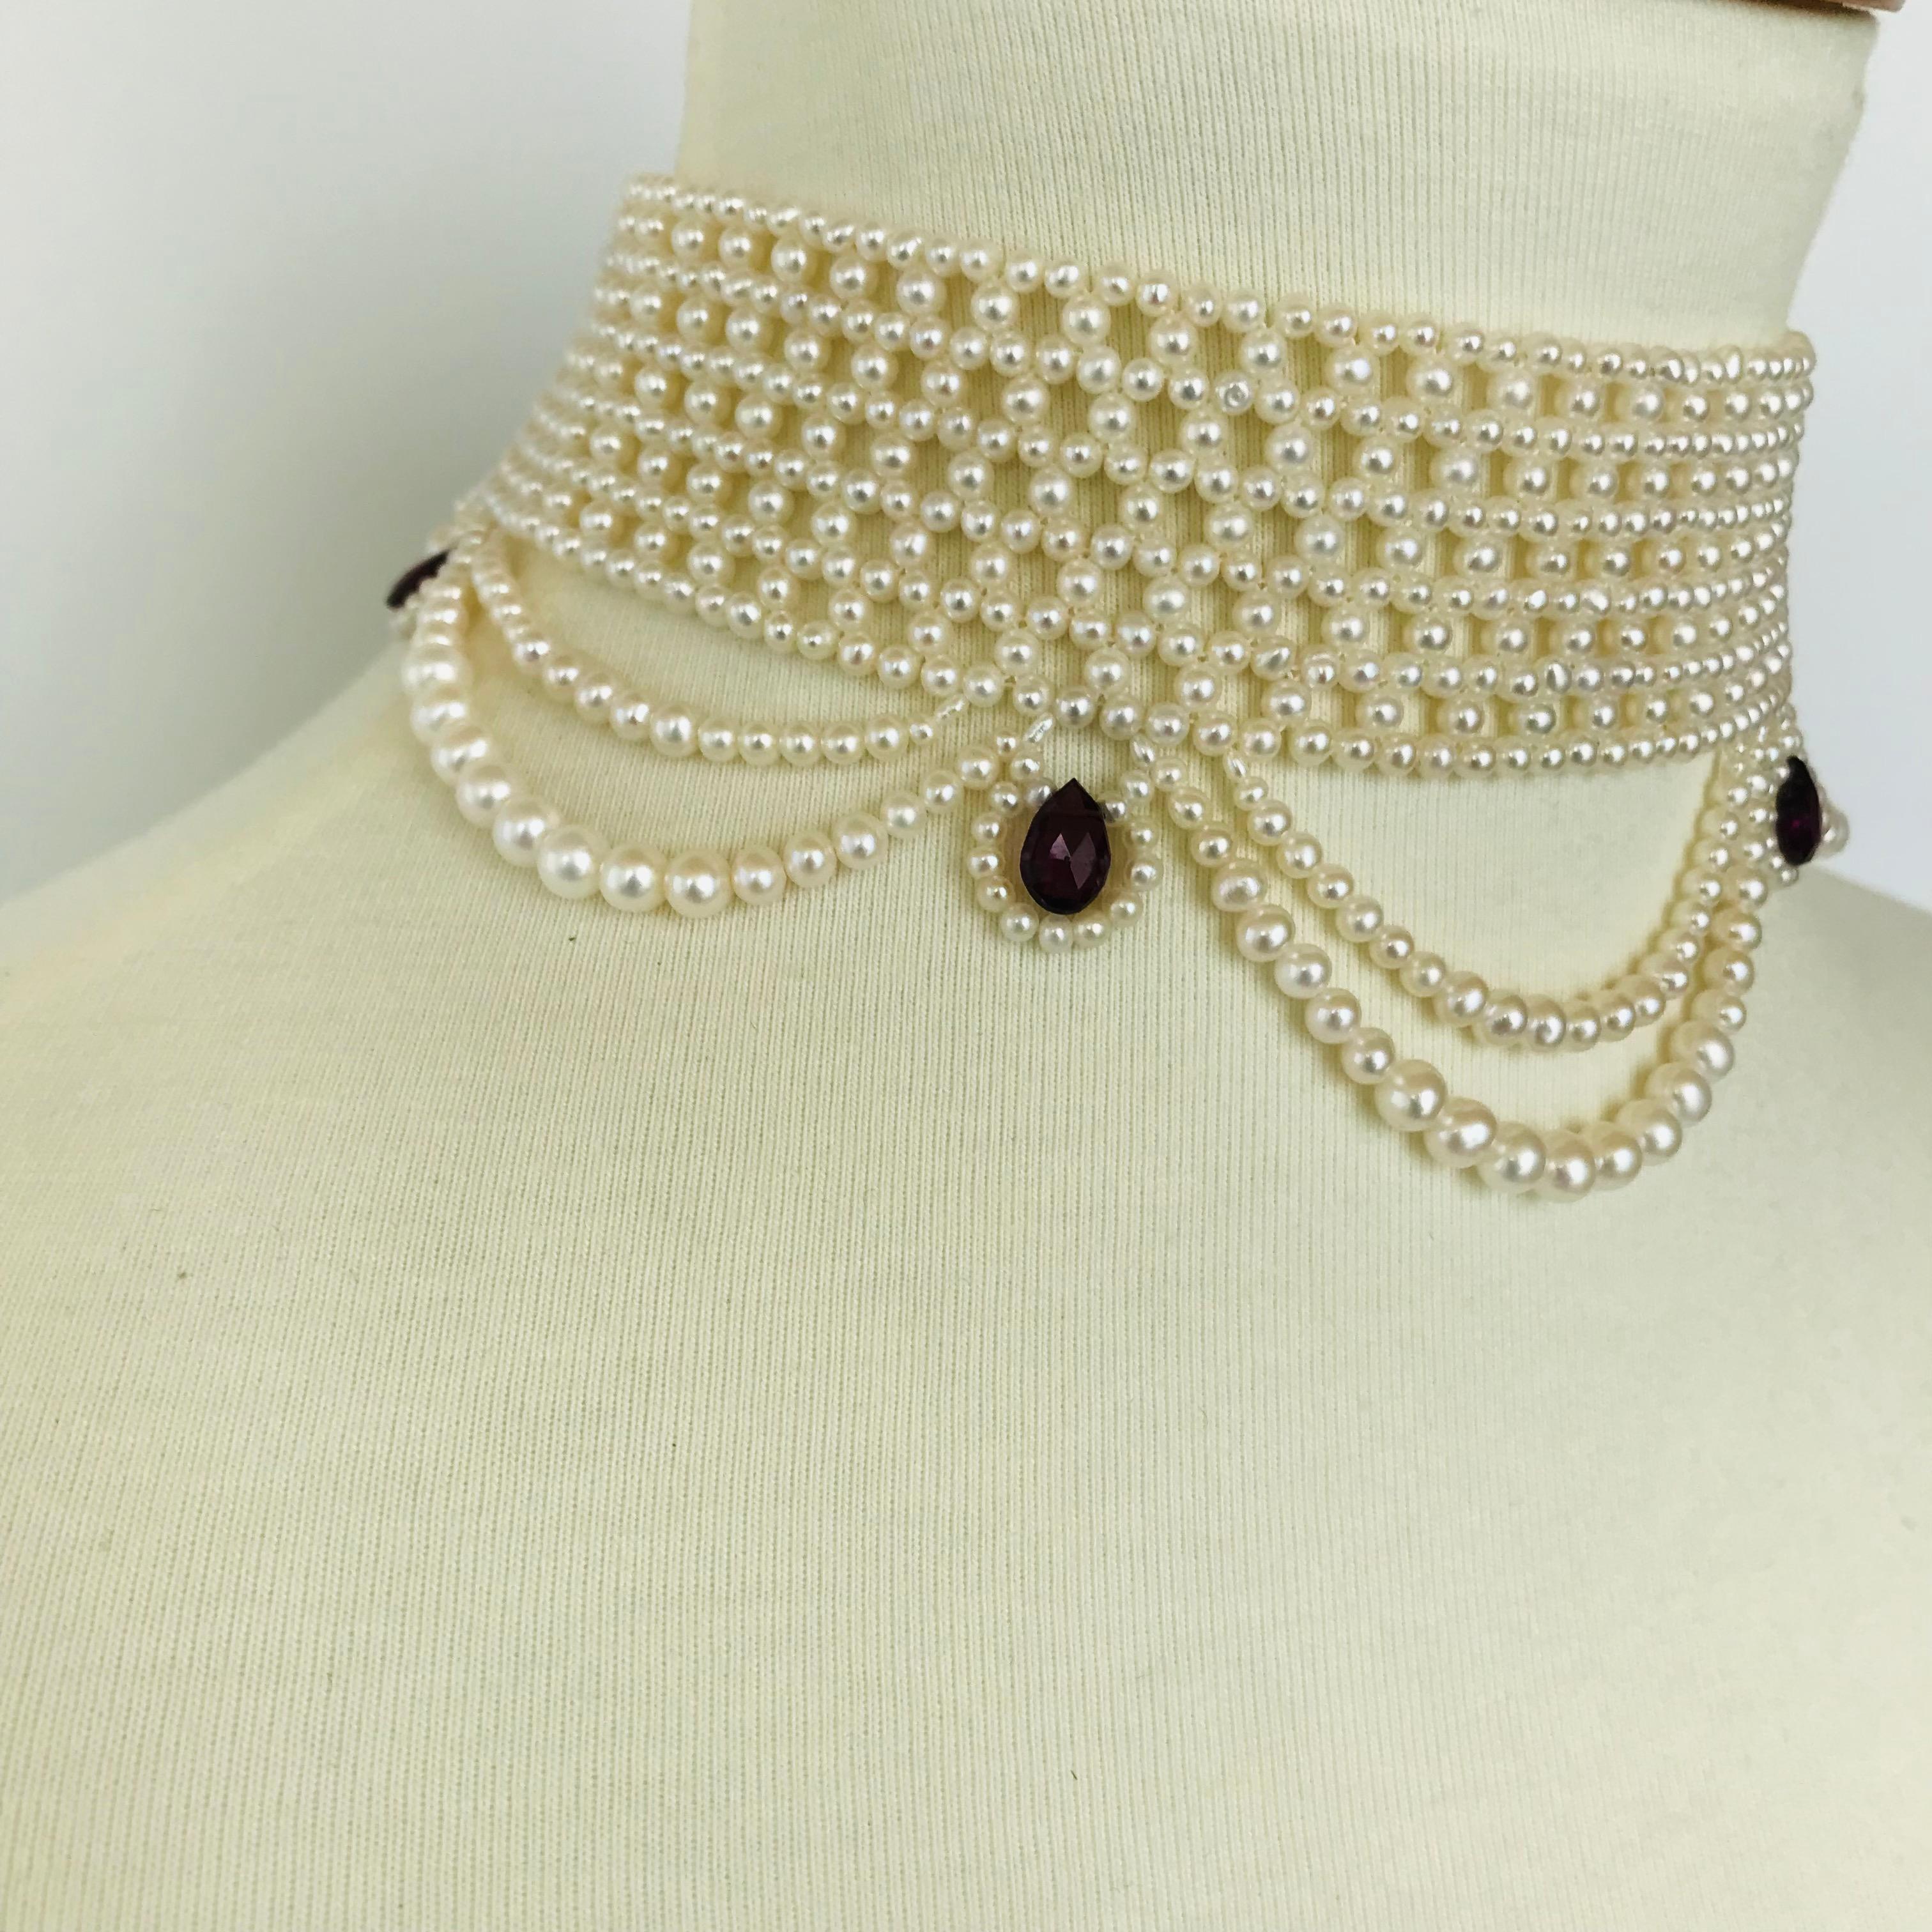 Bead Marina J Woven Pearl Choker with Pearl Drapes, Garnet Briolettes and 14 K Gold